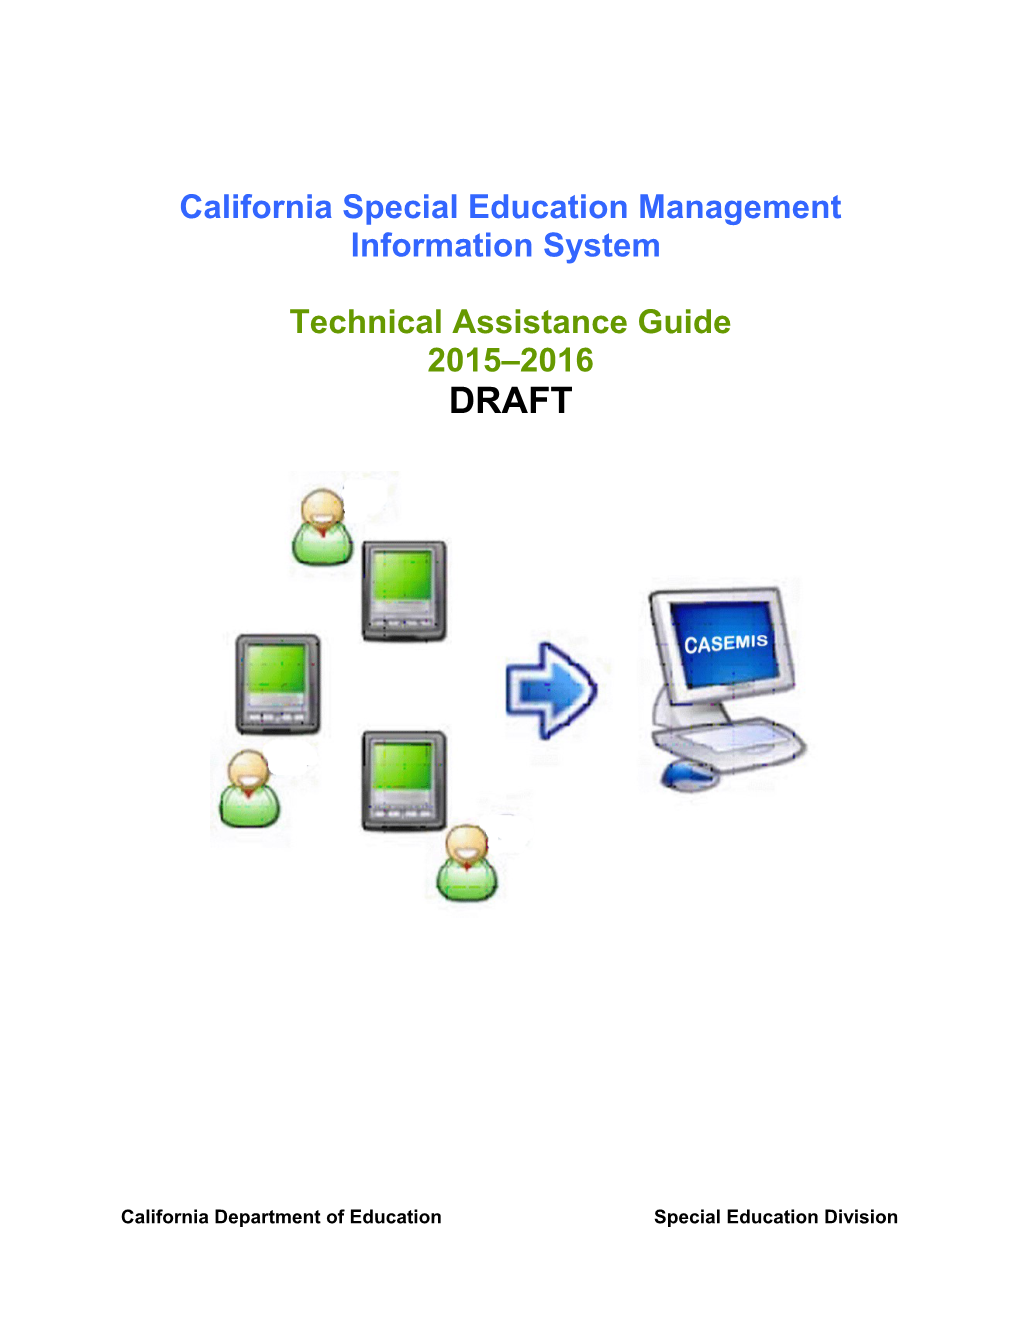 CASEMIS TAG - Data Collection & Reporting (CA Dept of Education)